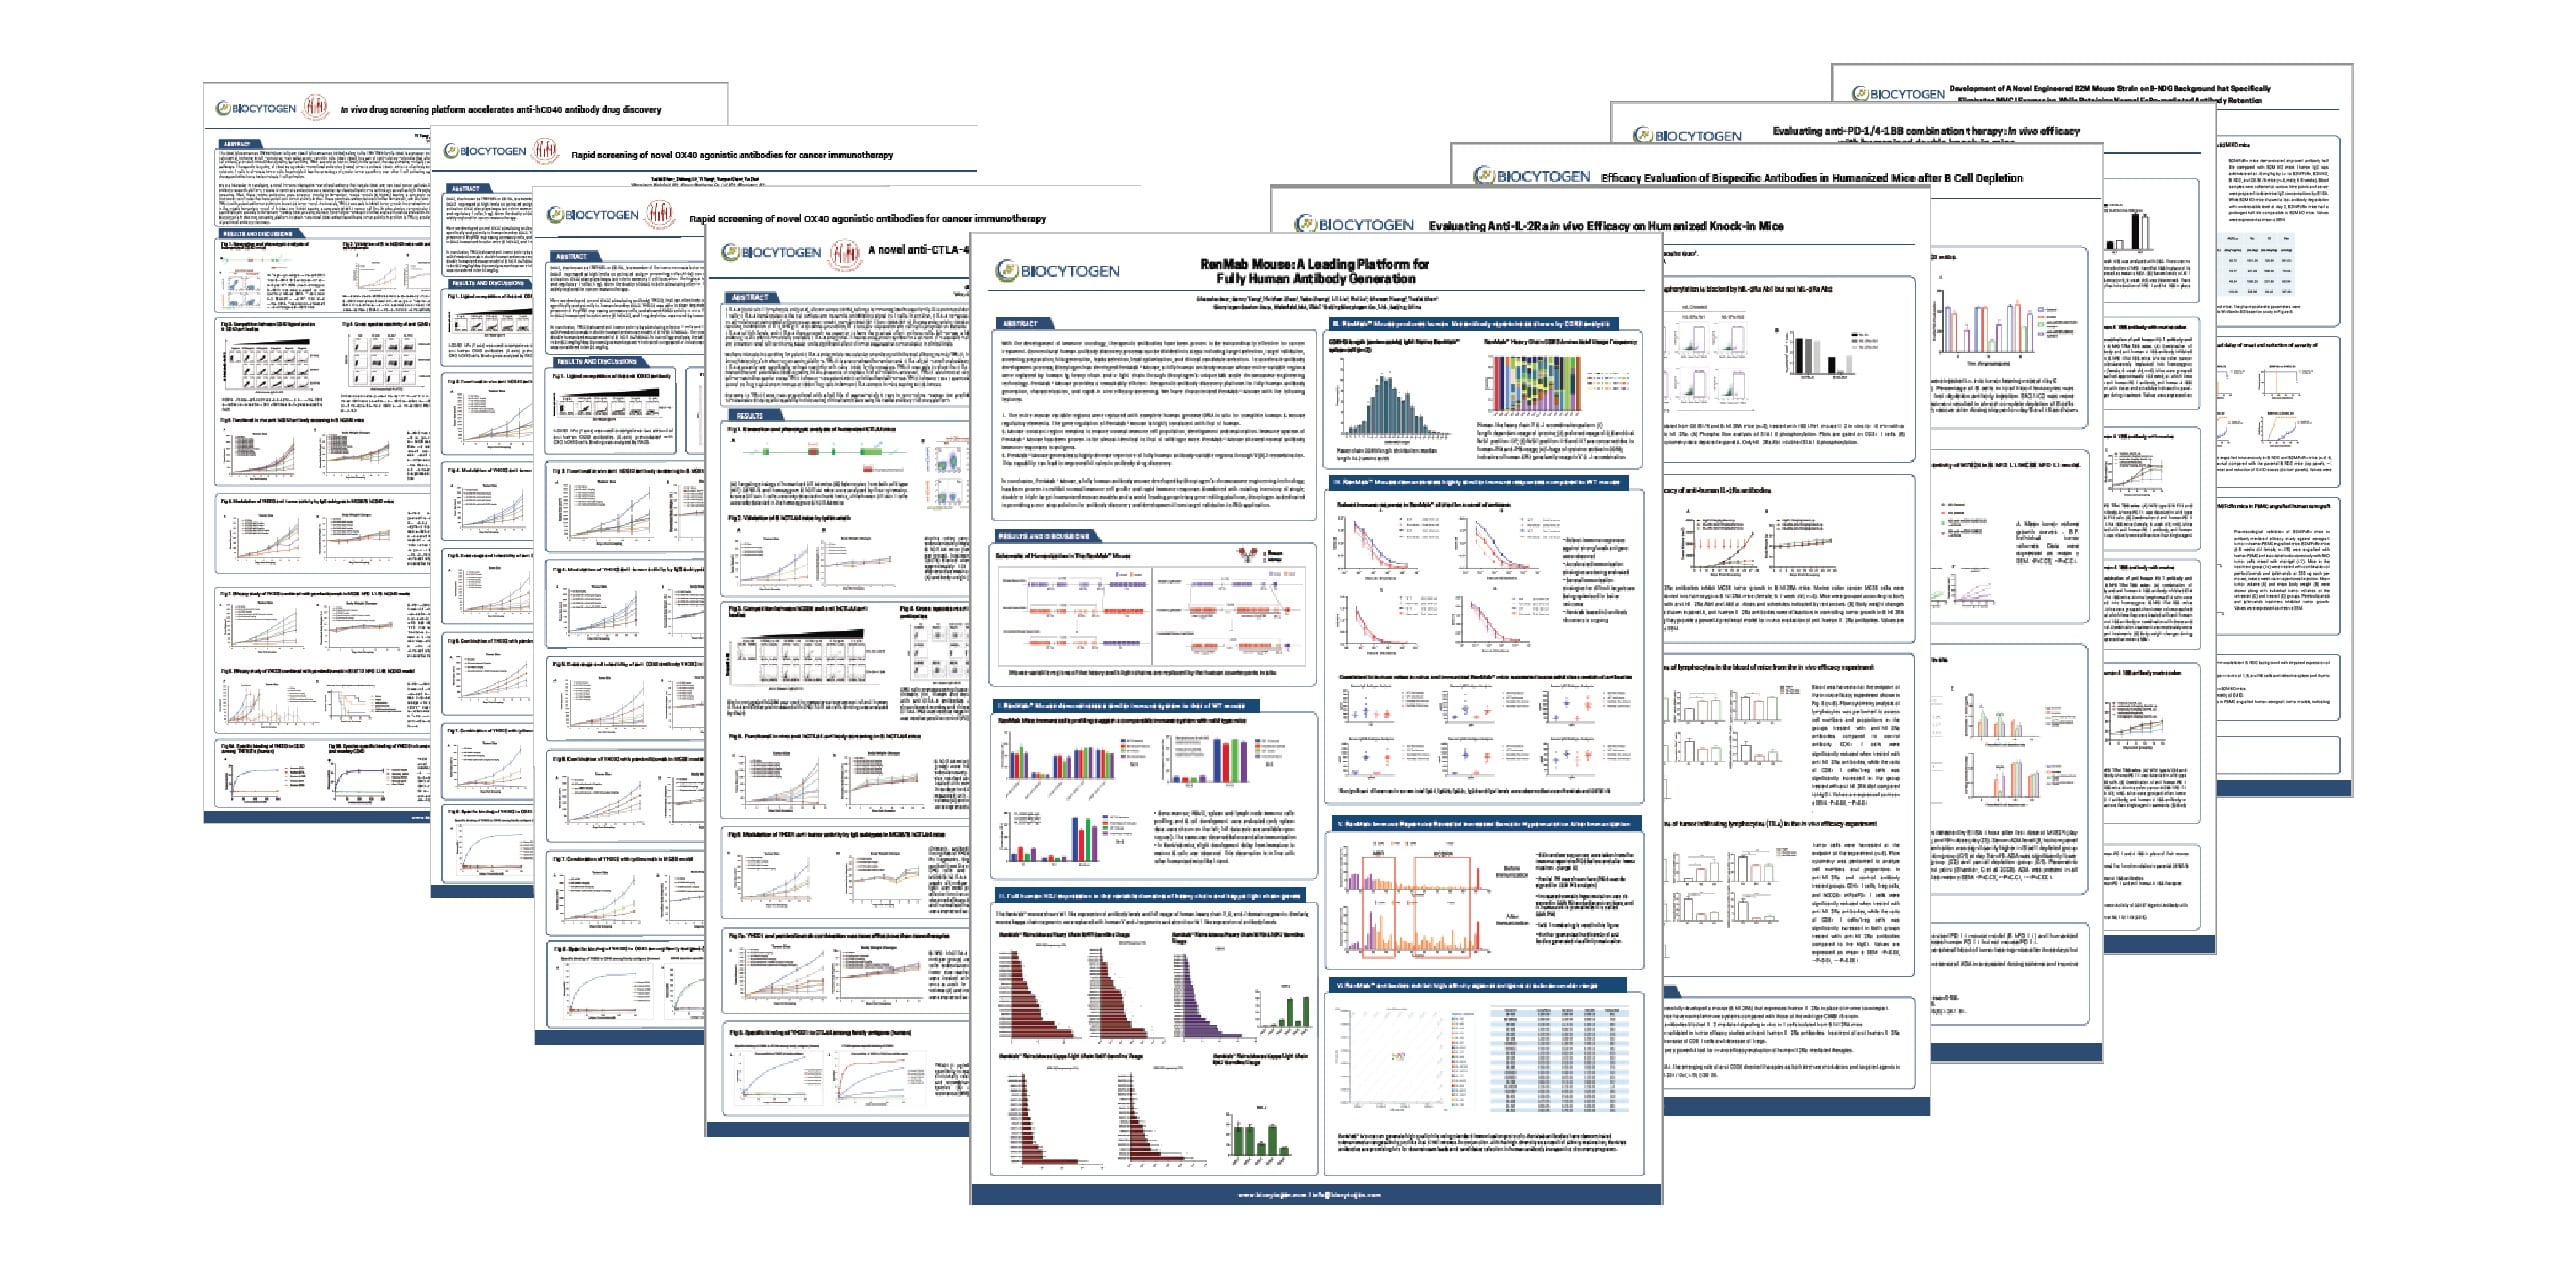 AACR Virtual Annual Meeting II (Poster Session) Biocytogen